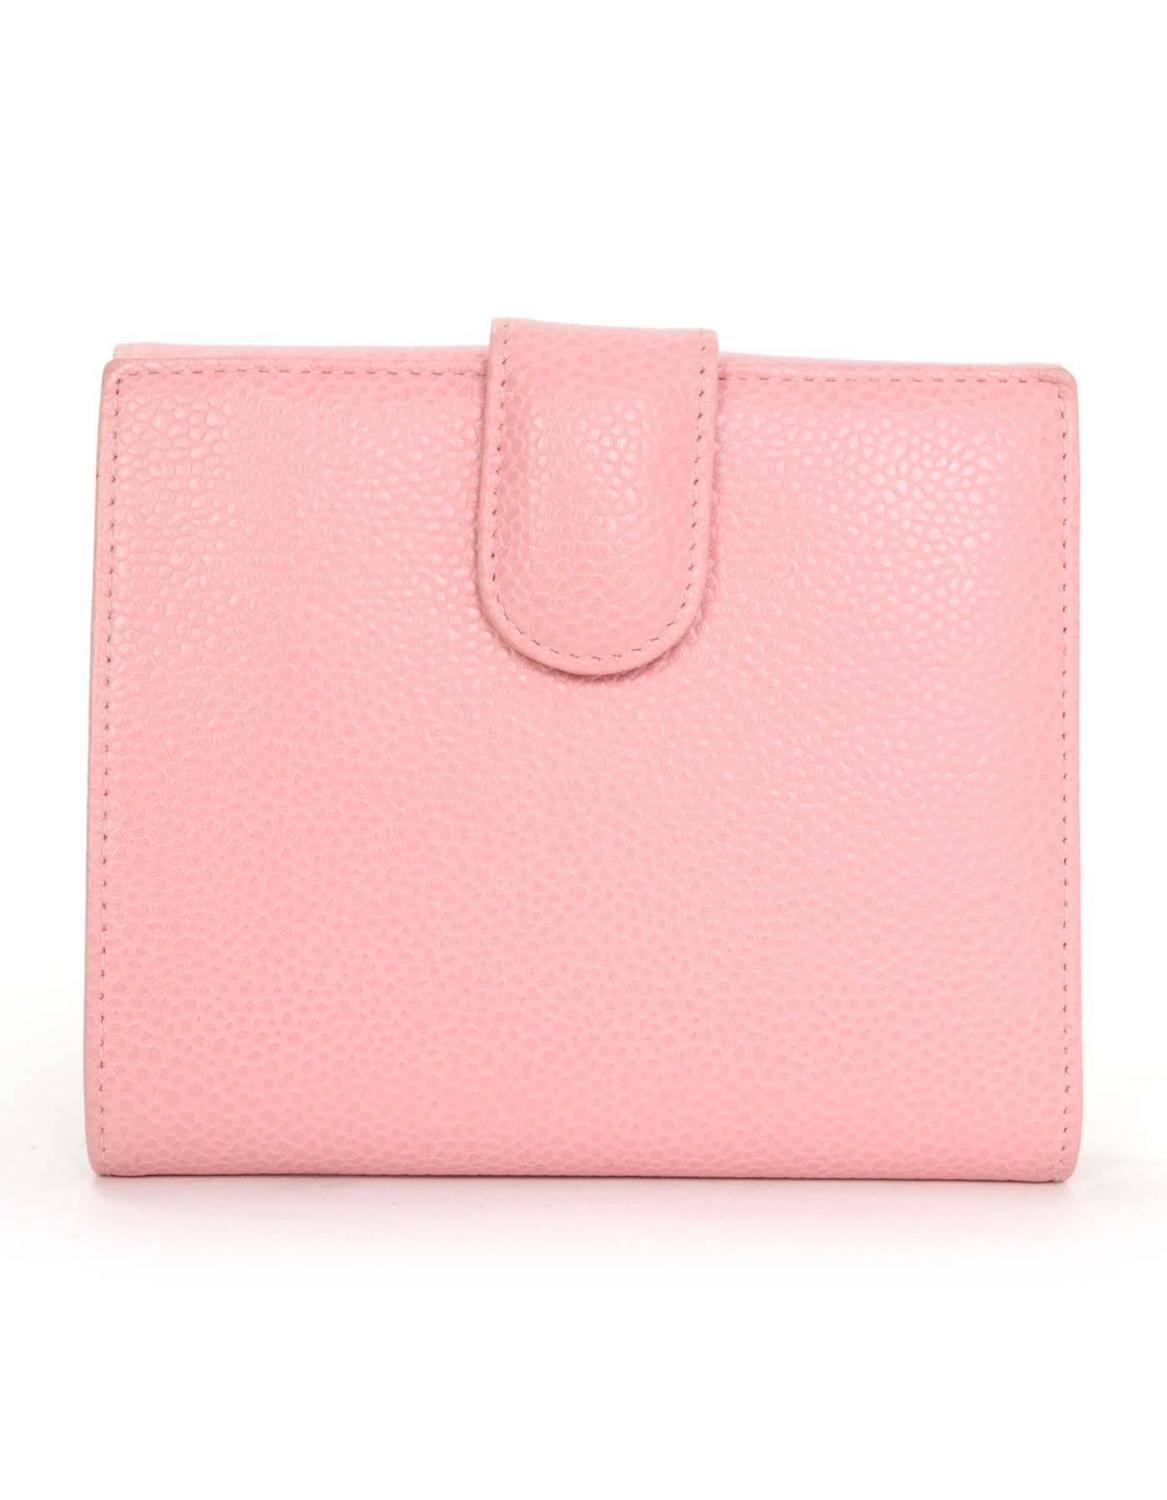 Chanel Pink Caviar Timeless CC Snap Wallet GHW For Sale at 1stdibs